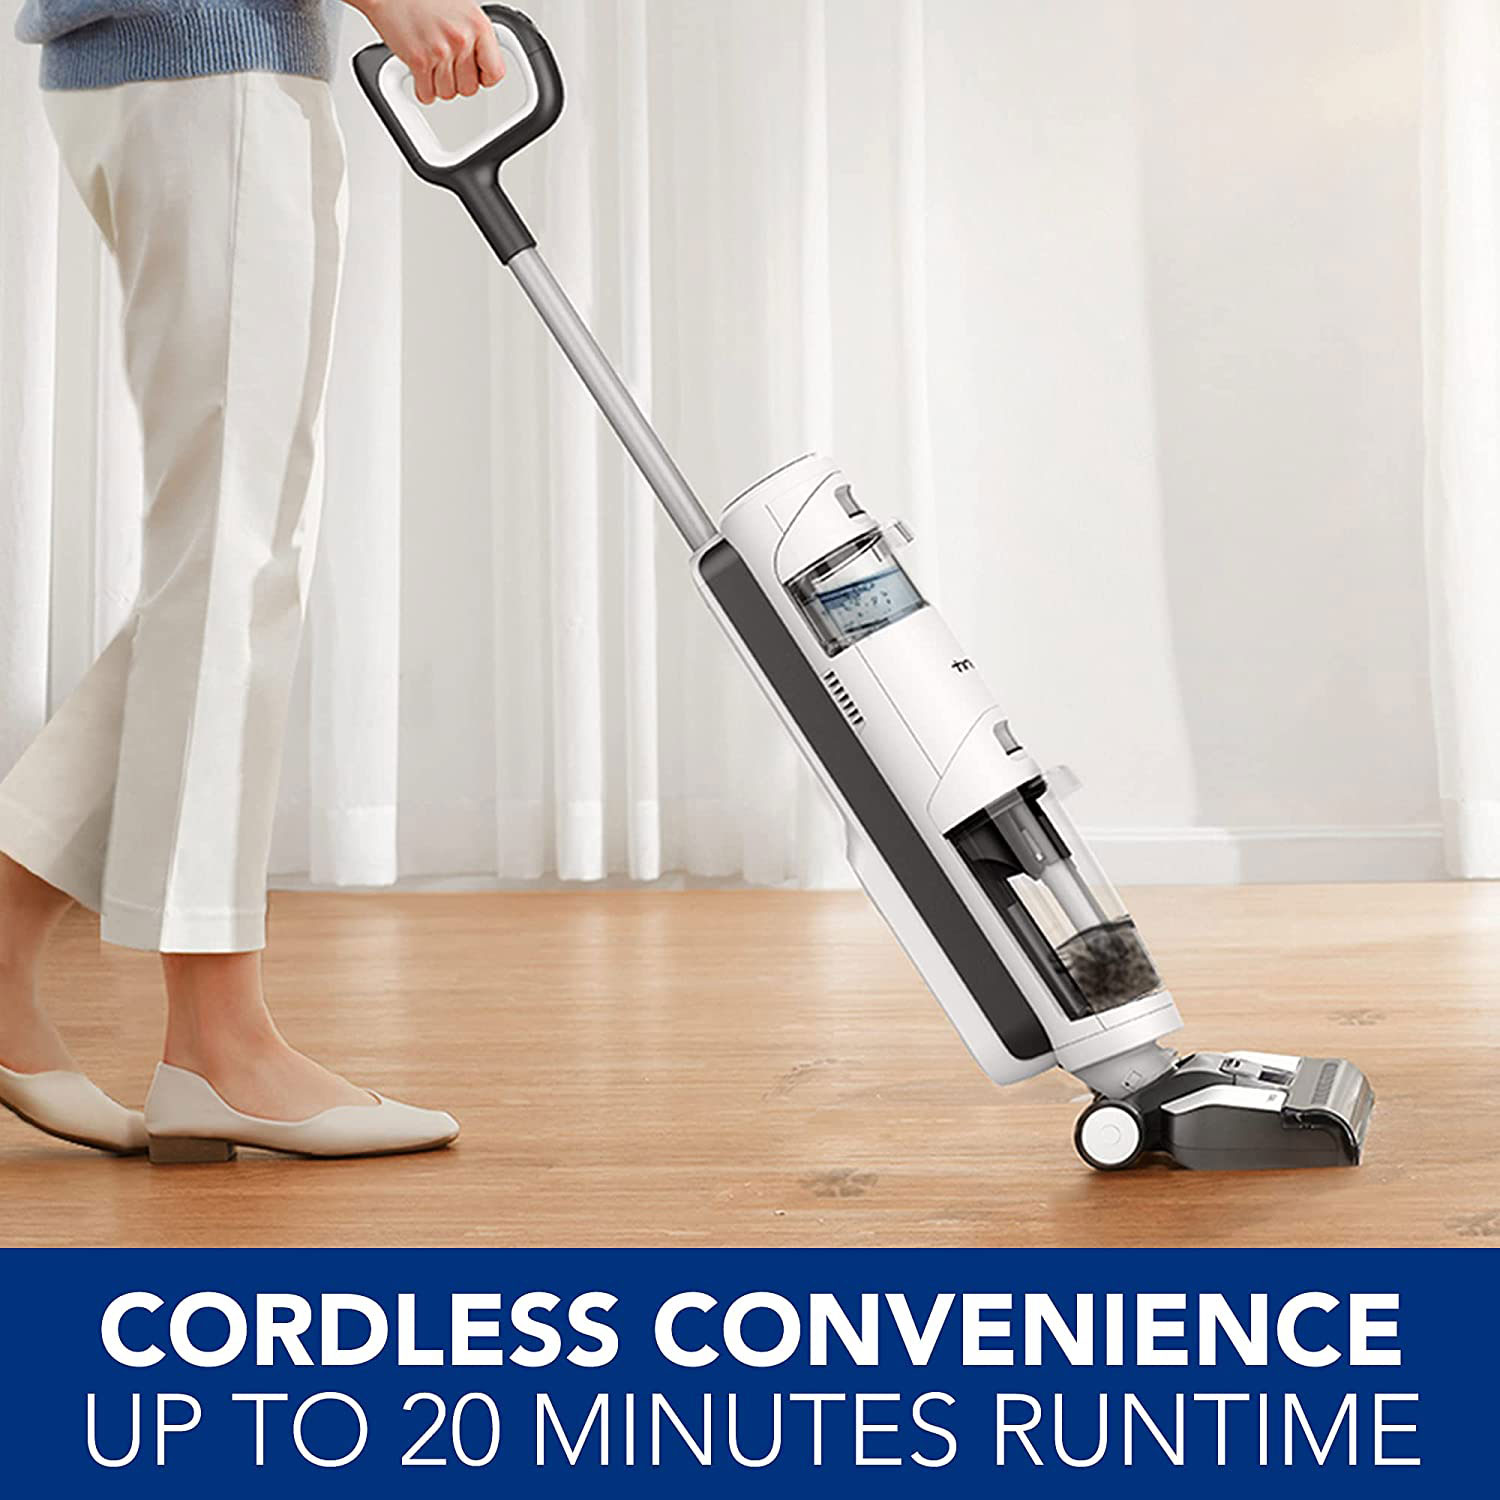 TINECO FLOOR ONE S5 EXTREME WET AND DRY CORDLESS FLOOR CLEANER 3